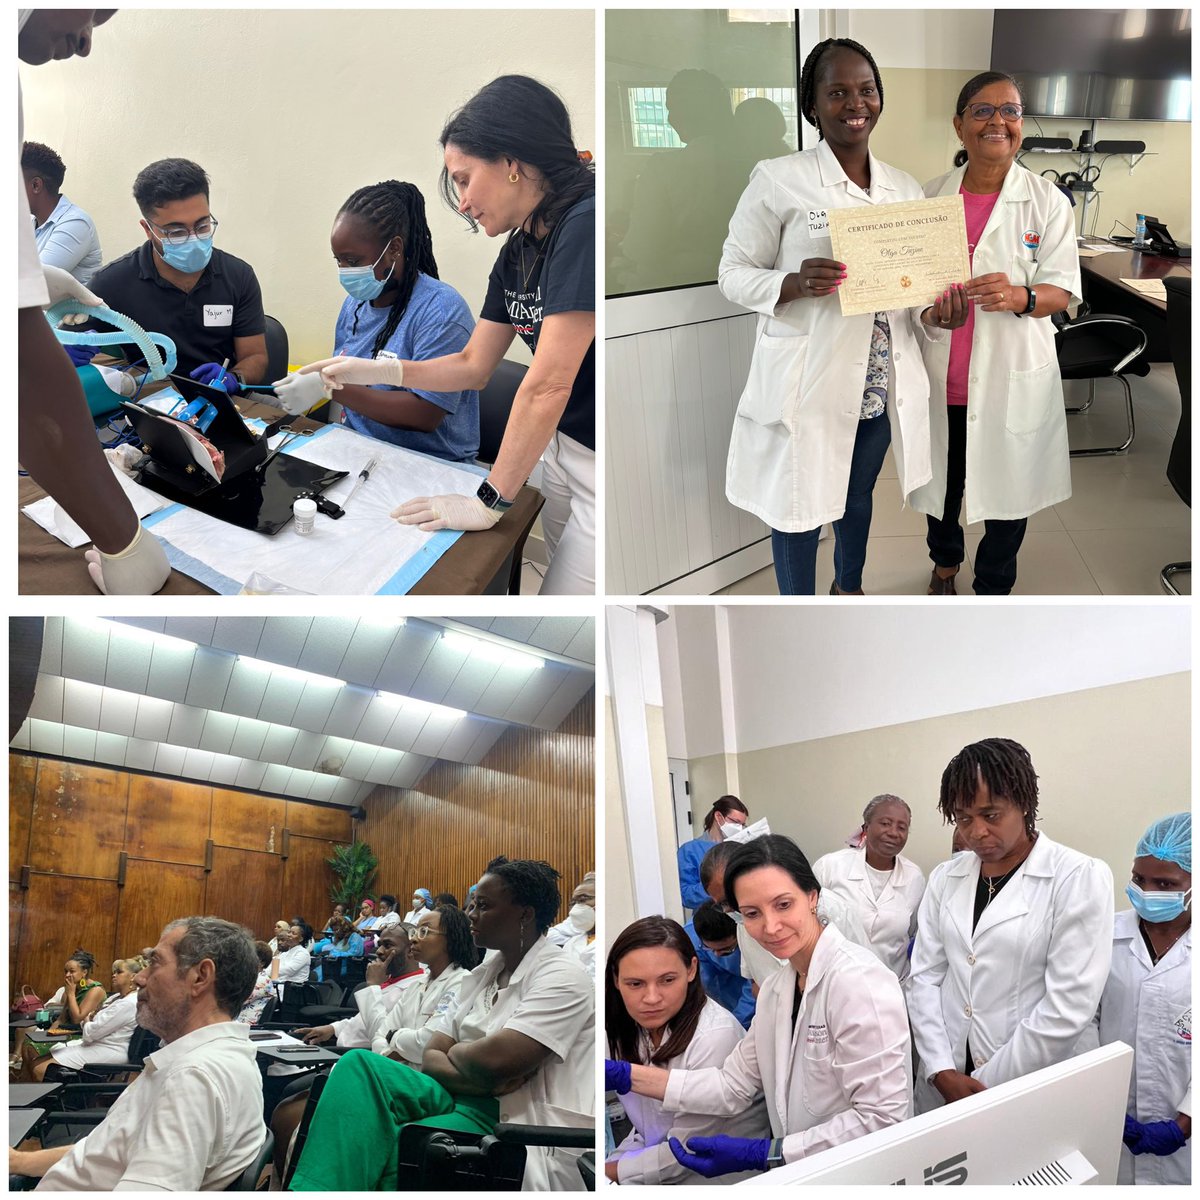 #WorldCancerDay !! Excelent and productive week in Mozambique! Colposcopy/LEEP training, a new study was started, Brazilian Embassy visit, GynOnc, Urology and Hematology teams and more!@MDAndersonNews @Jrodelkins @kmschmeler @MelissaLoVaron @ar_steinmetz @345071 @MorettiMarques